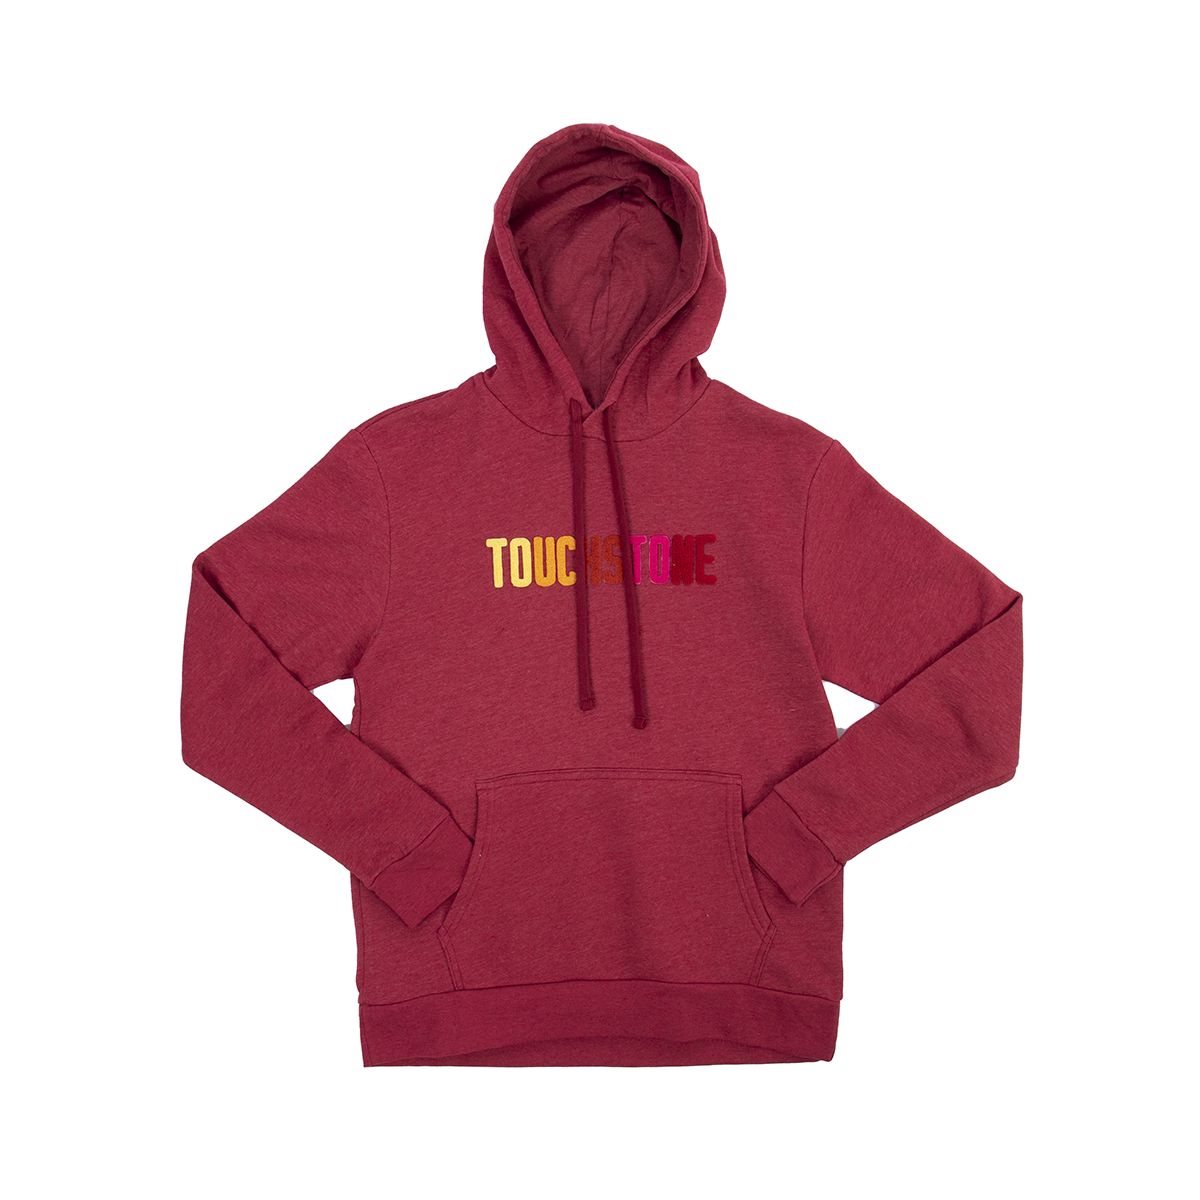 » Unisex Classic PCH Pullover Hooded Sweatshirt (100% off)